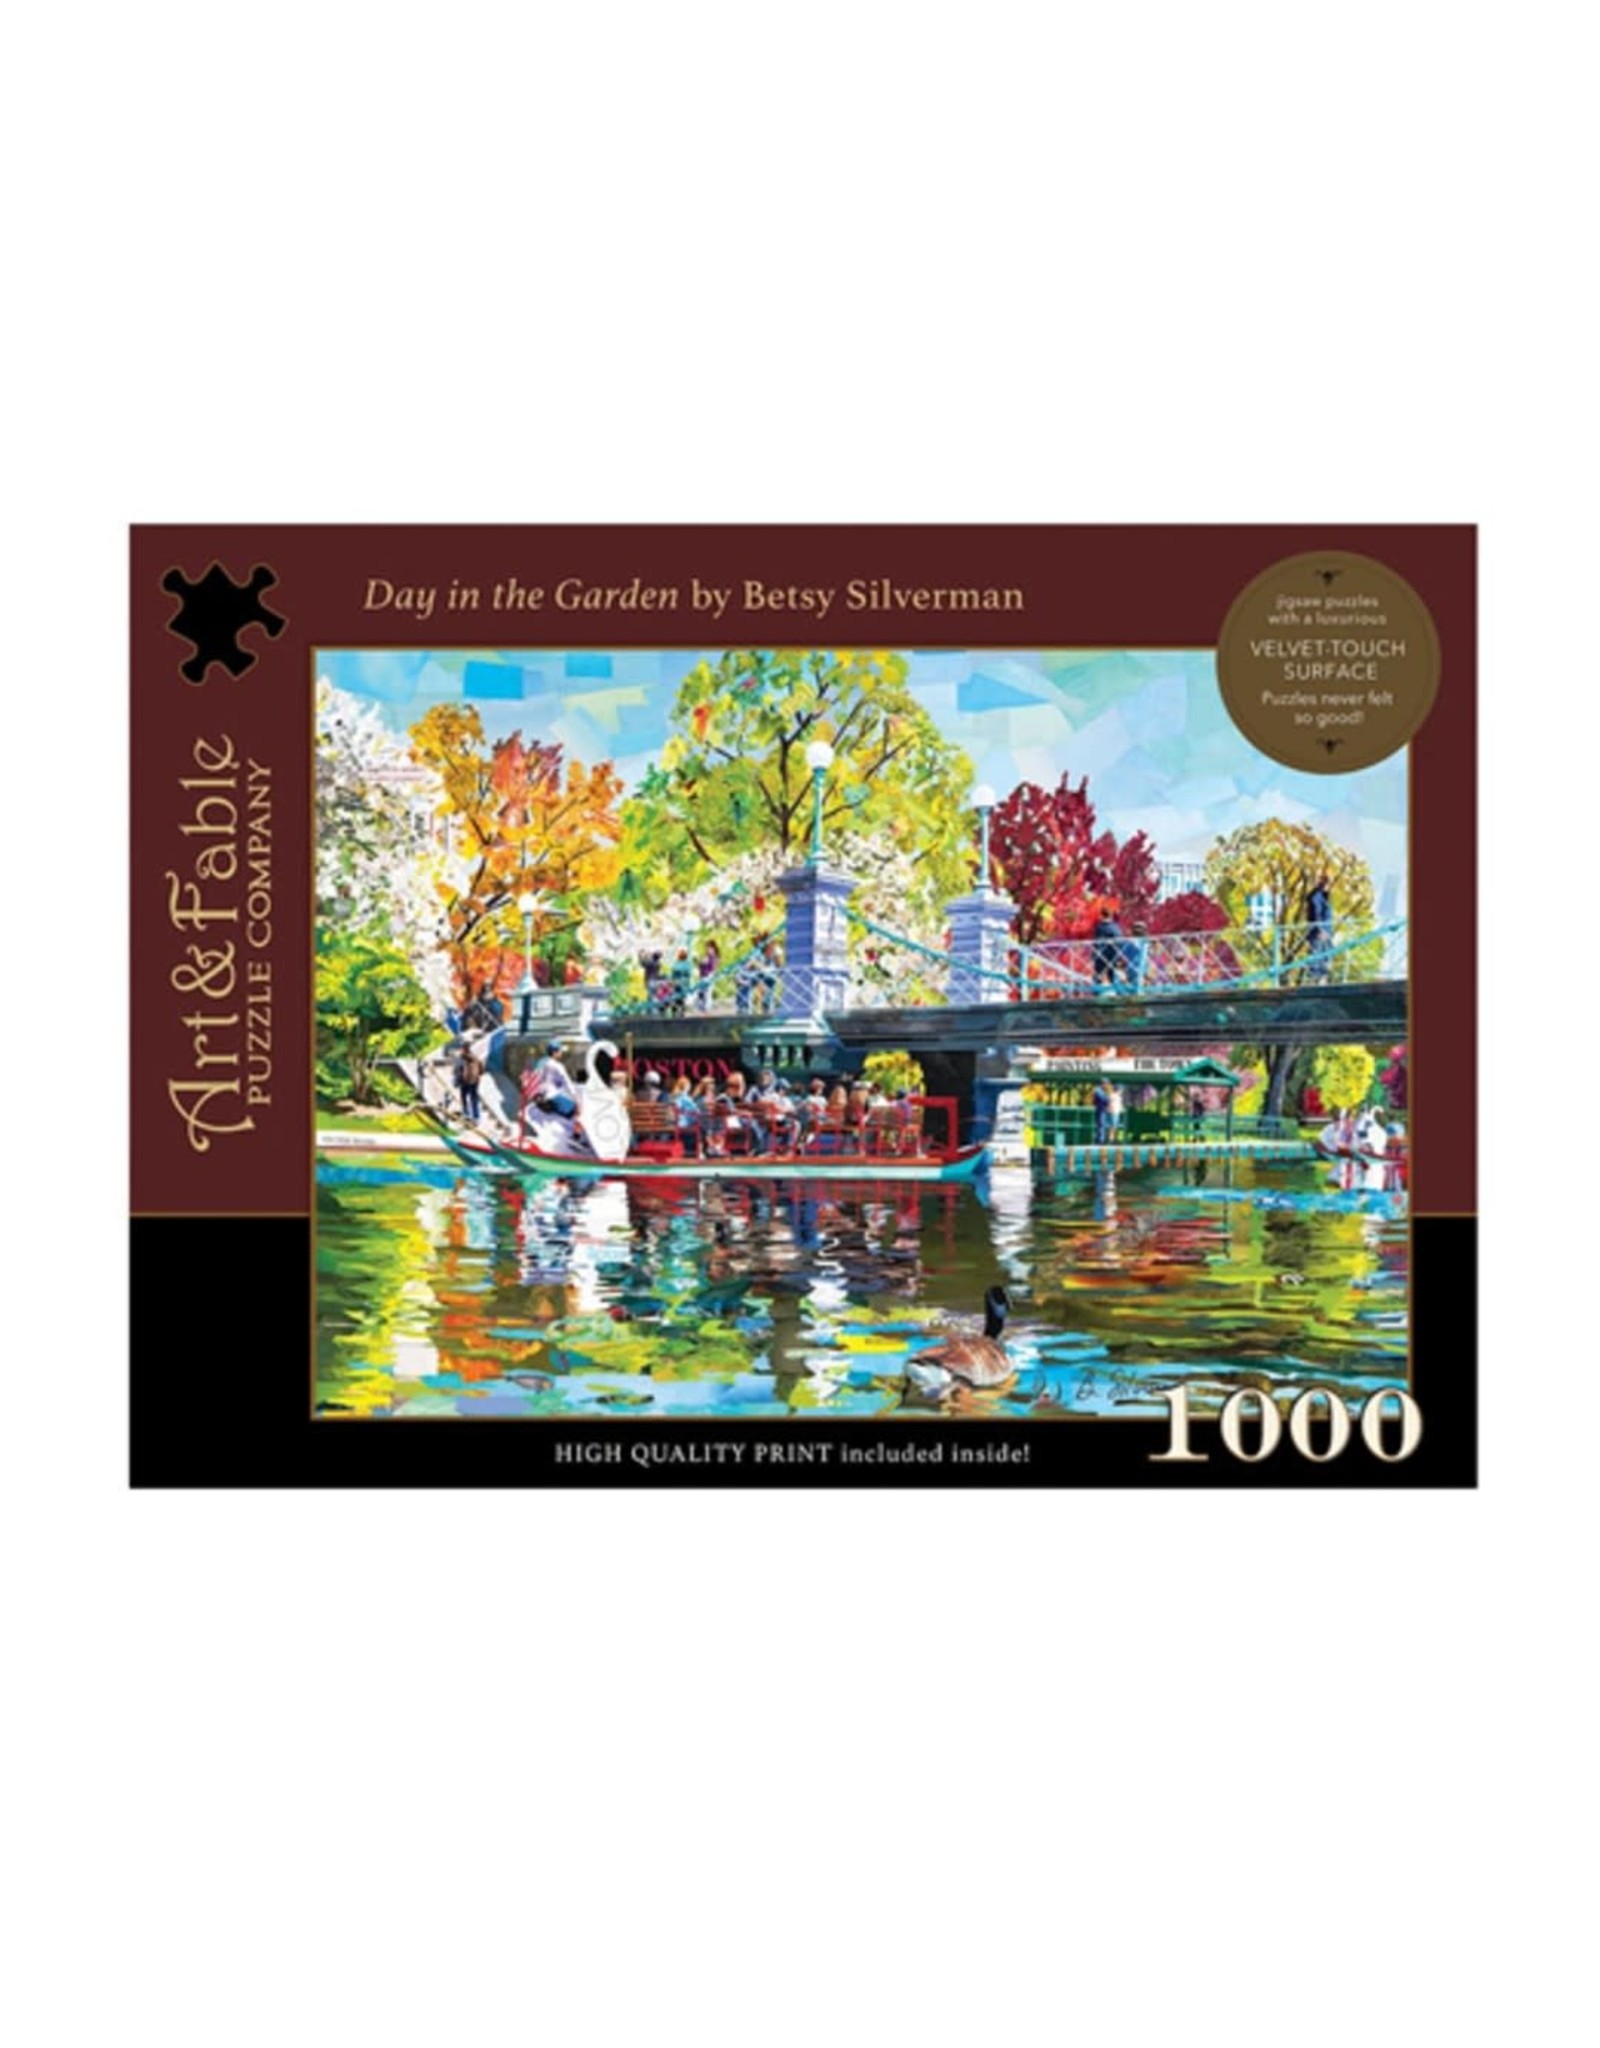 Art & Fable Puzzle Company Day in the Garden 1000pc